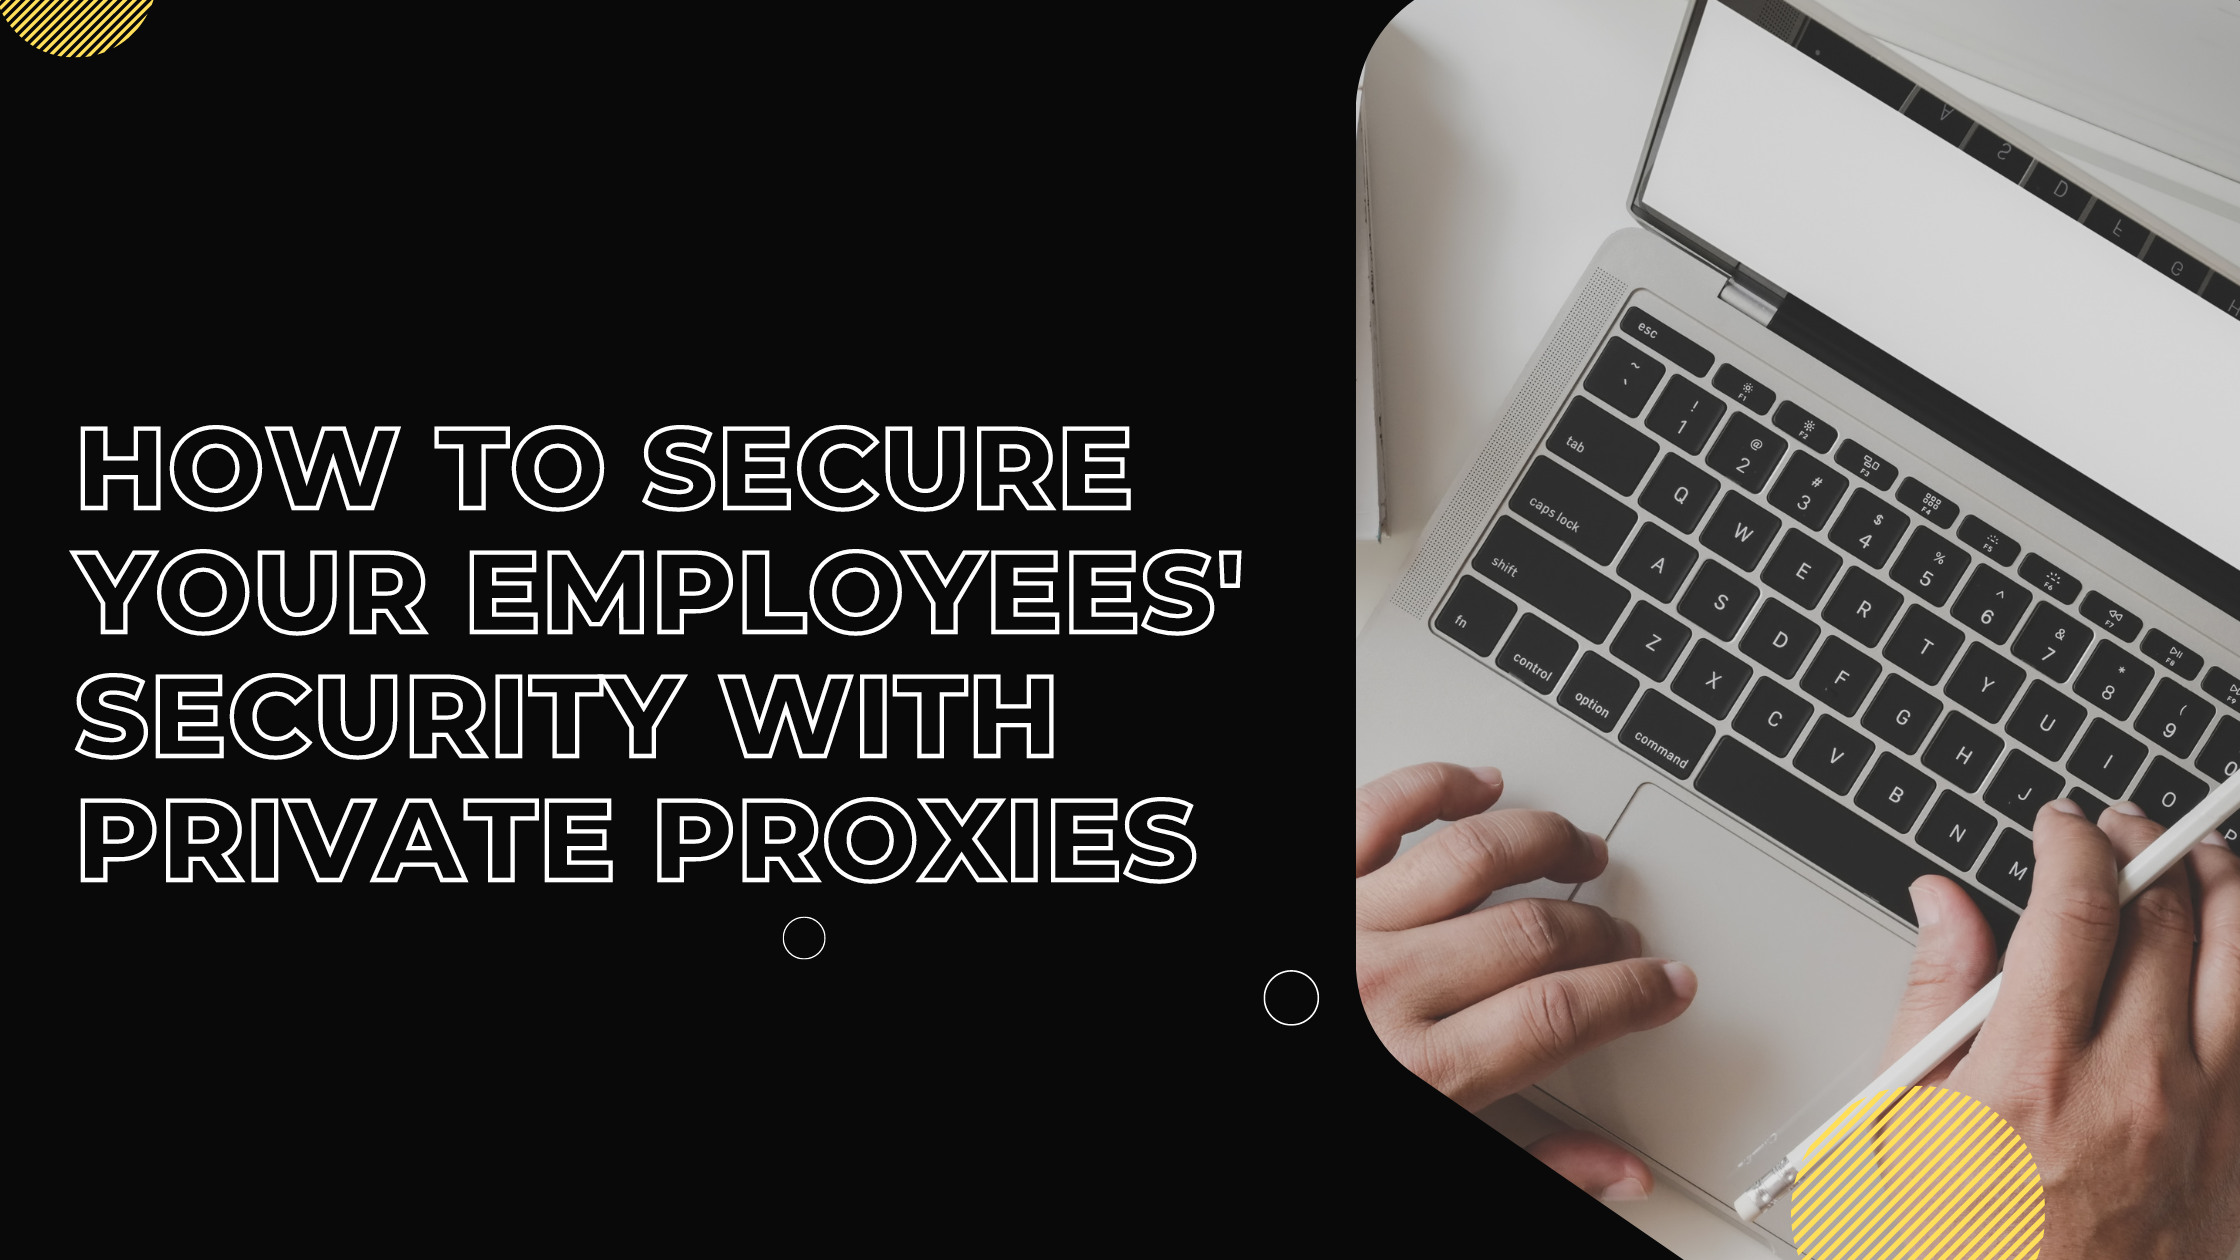 How to Improve Employees' Security with Private Proxies?